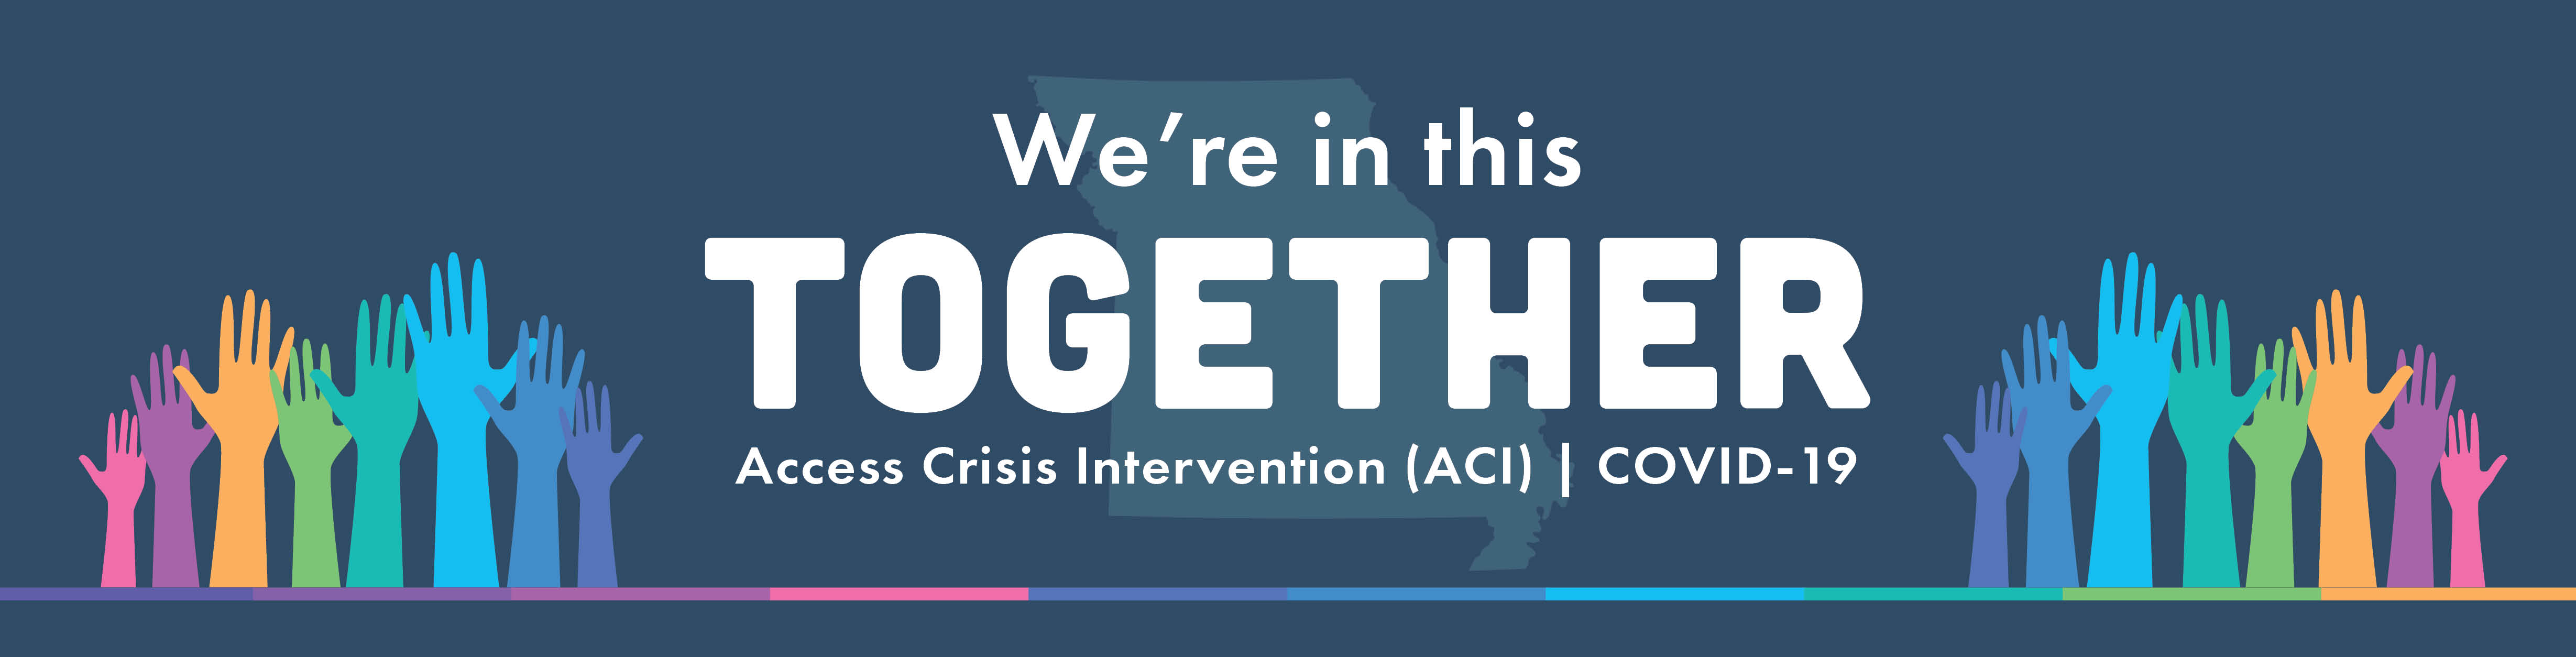 We're in this together Access Crisis Intervention (ACI) COVID-19